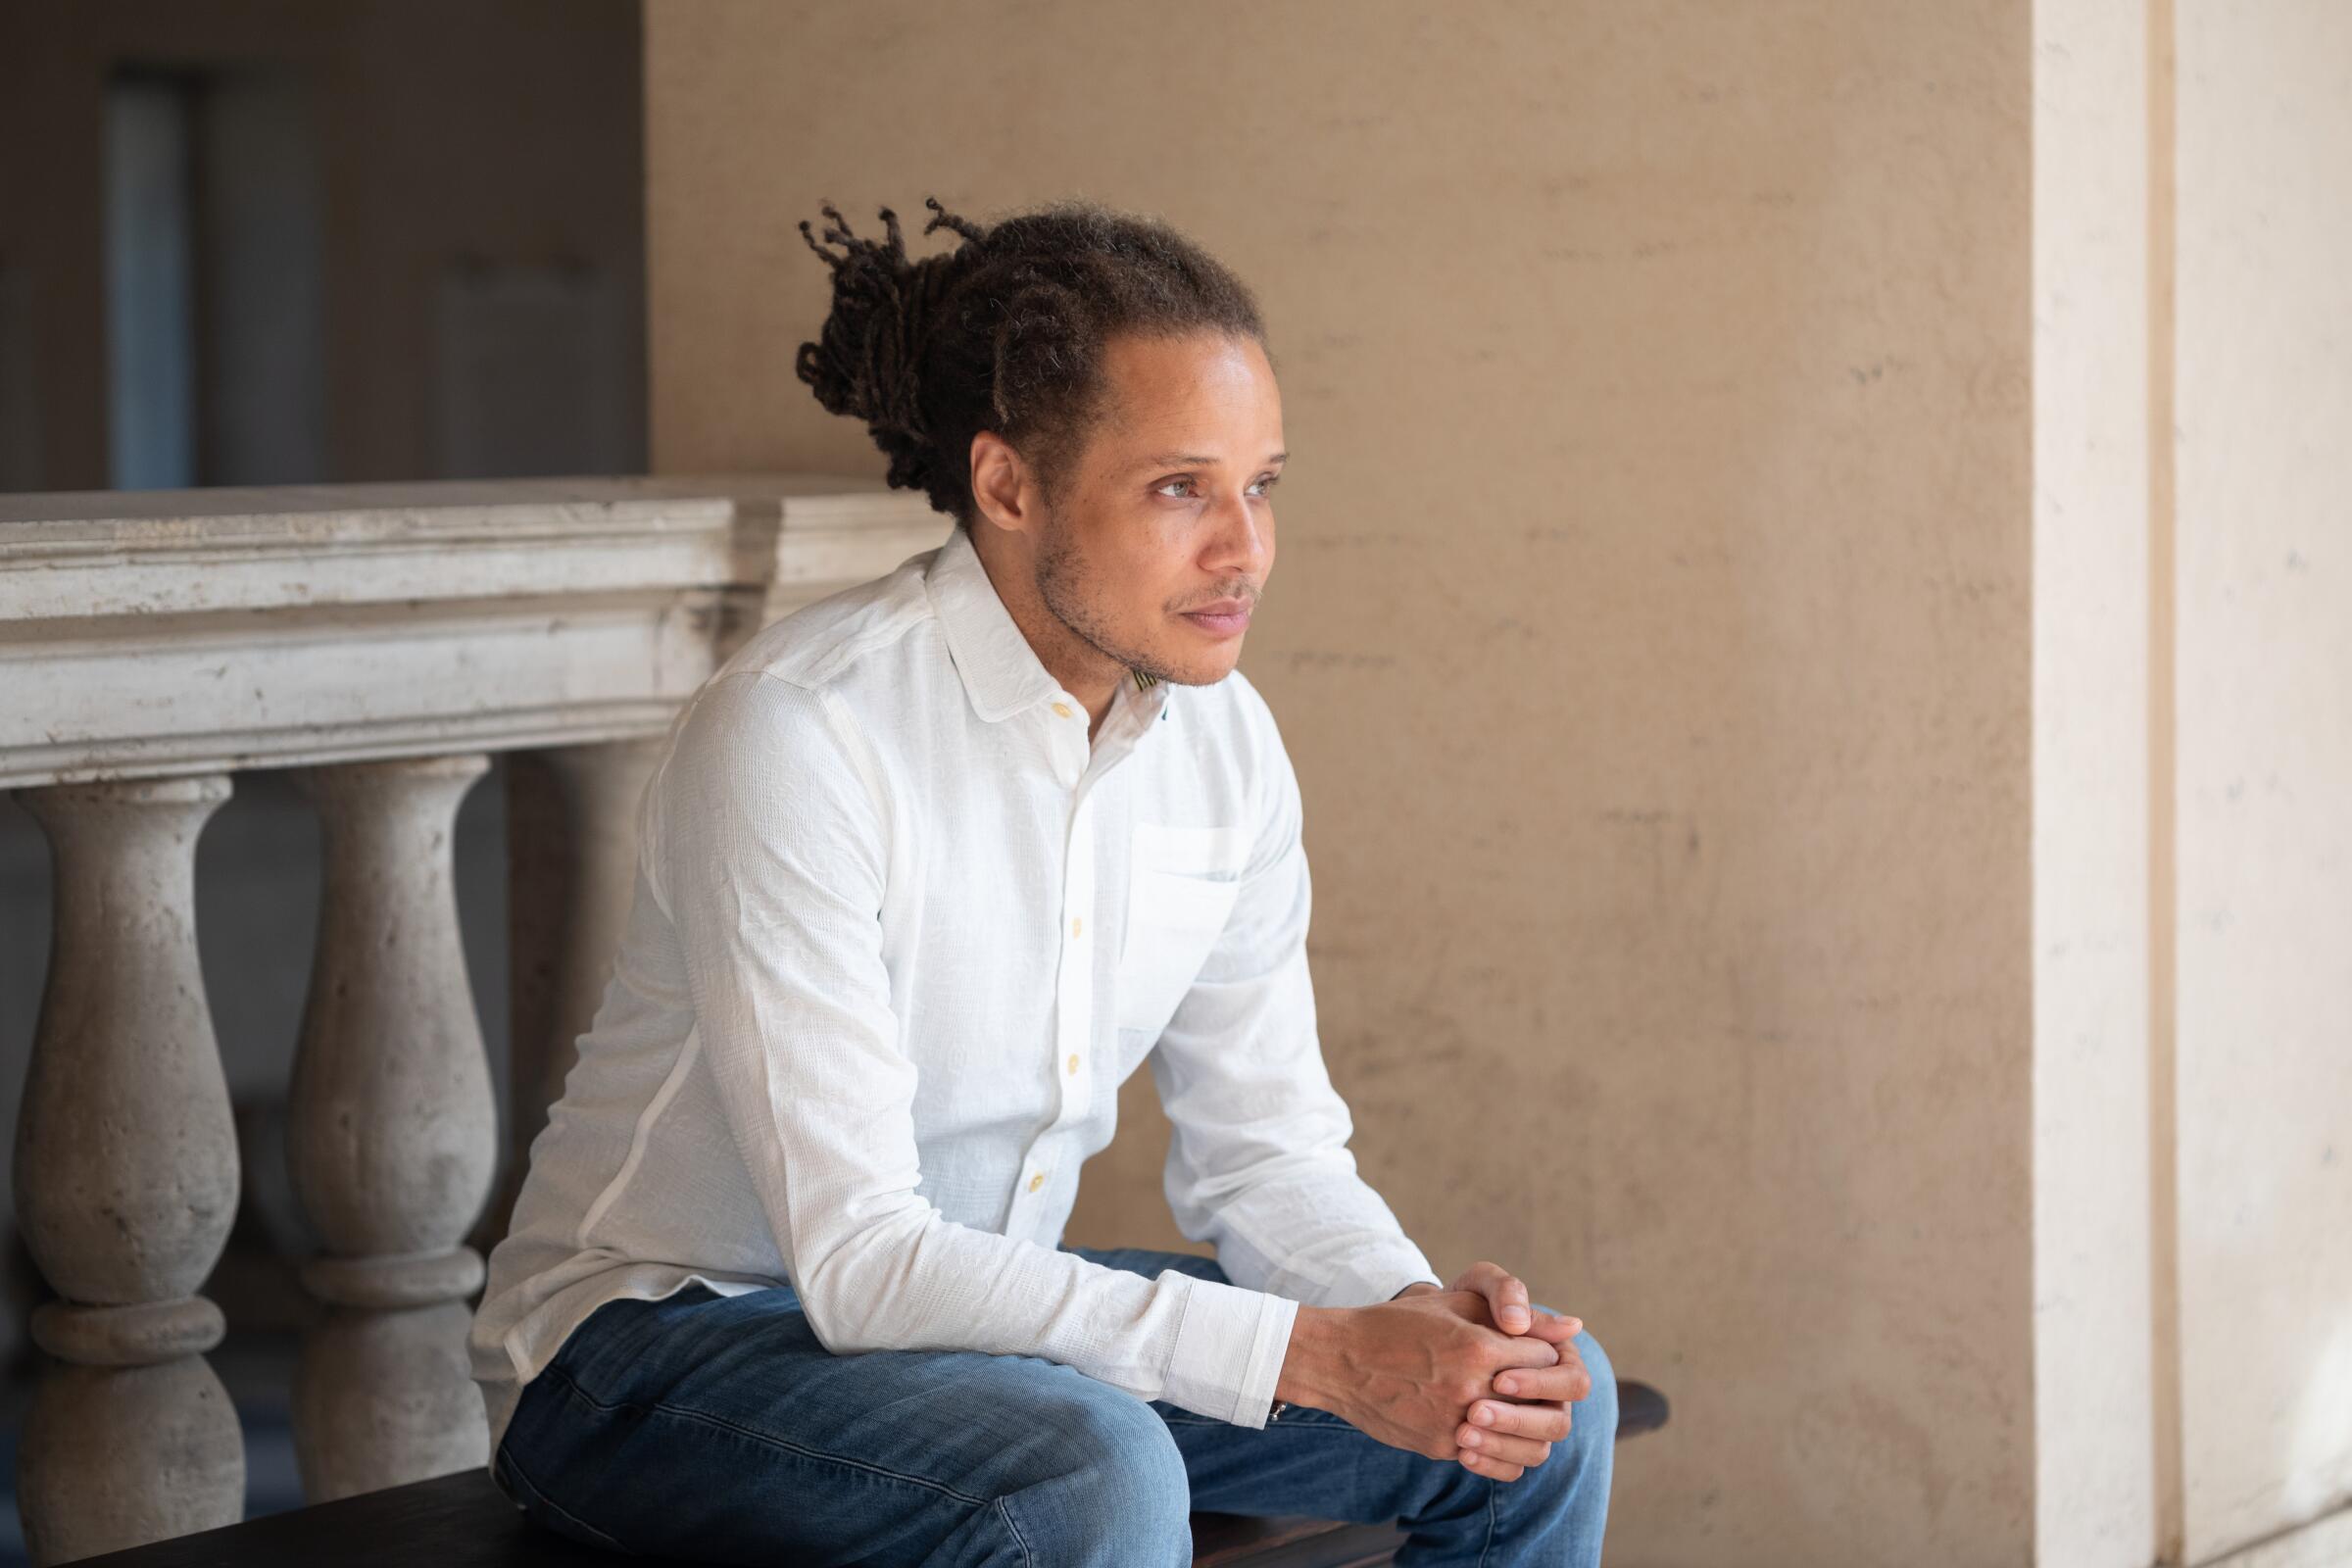 A man in a white shirt and blue pants sits contemplating.